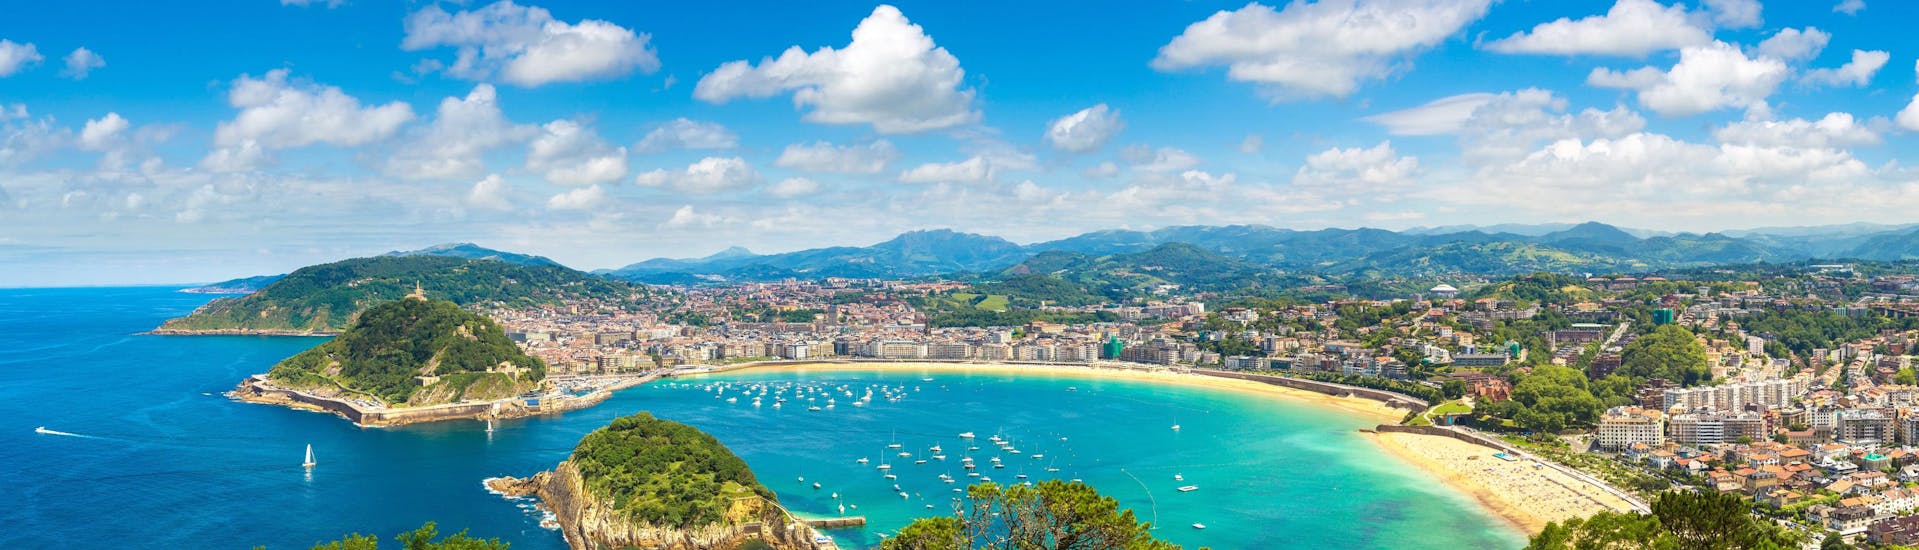 View of the bay of Donostia in San Sebastián where boat trip providers offer their excursions.